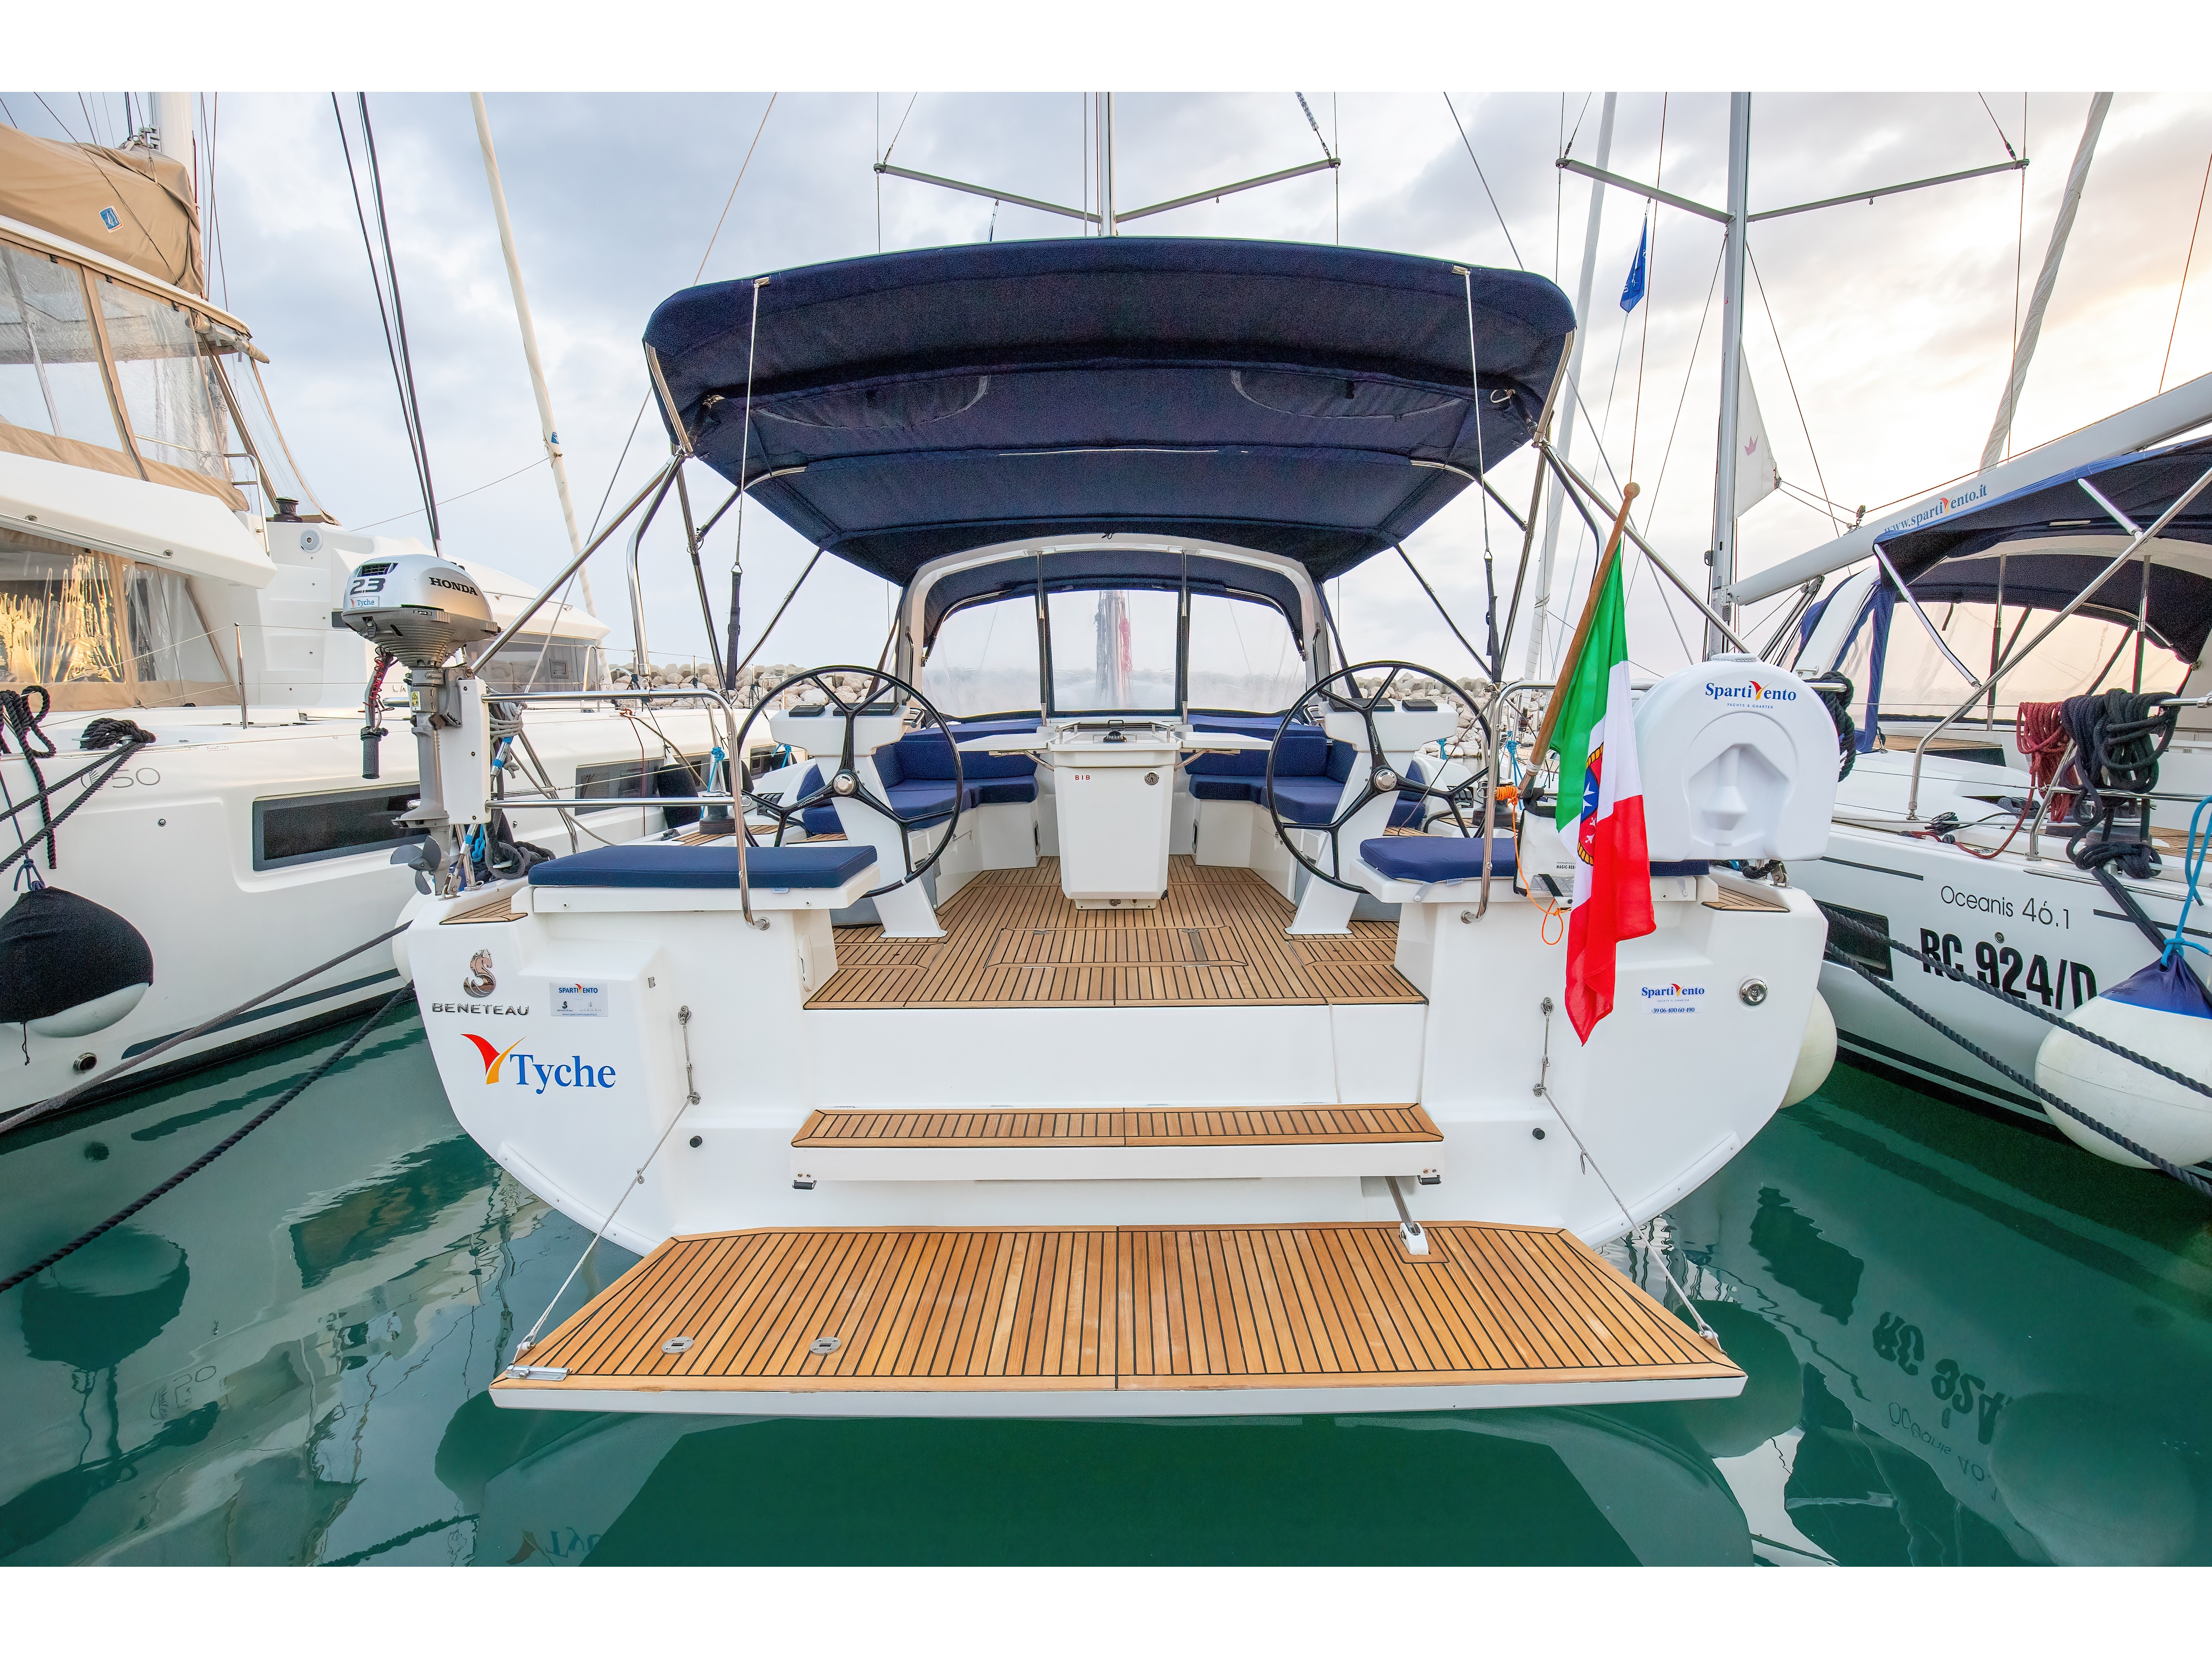 Oceanis 46.1 - Yacht Charter Salerno & Boat hire in Italy Campania Salerno Province Salerno Marina d'Arechi 3